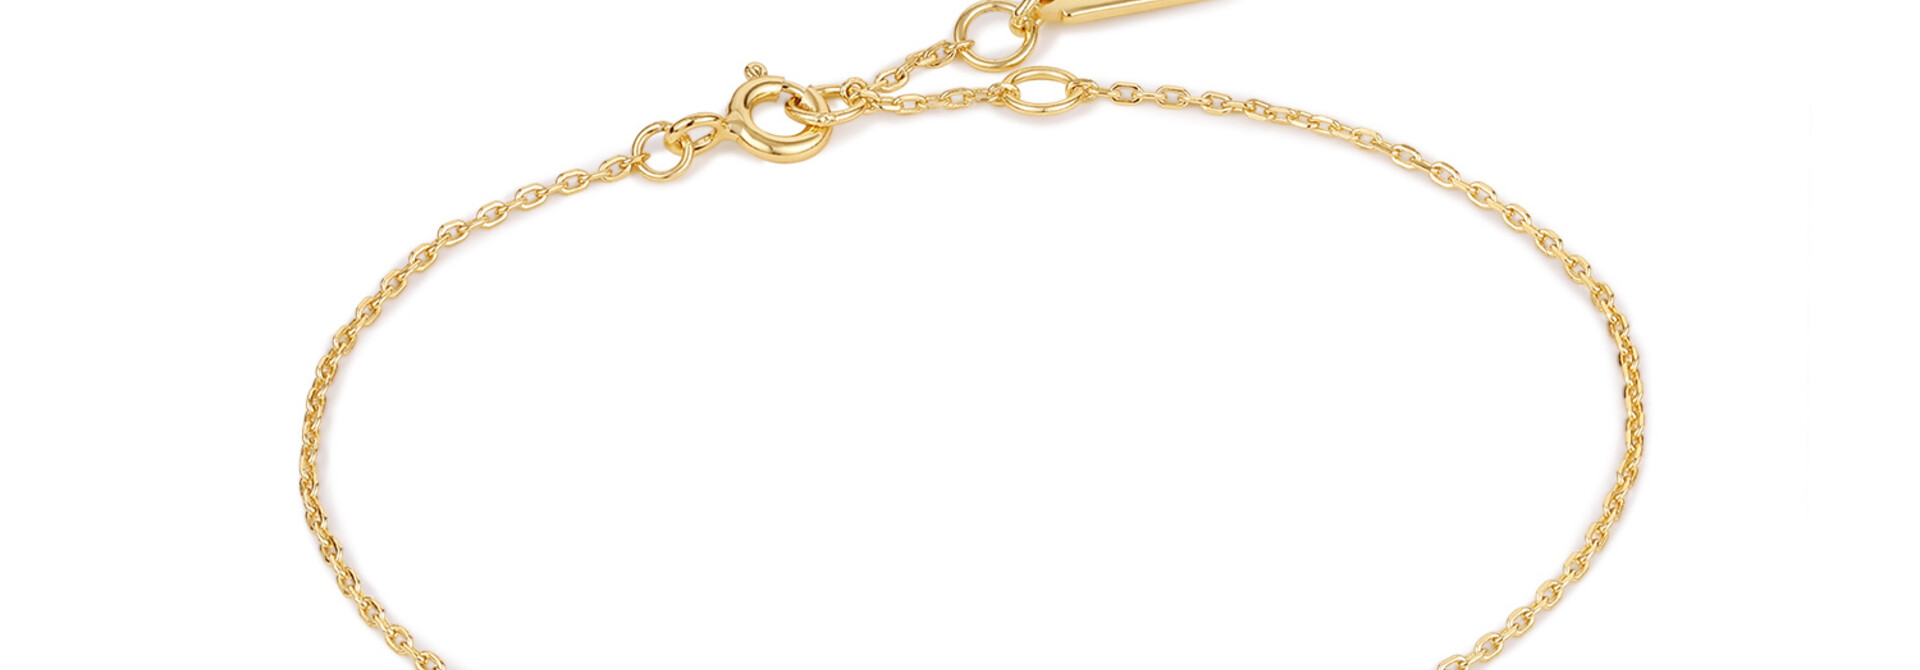 Wave Link Armband - Gold plated